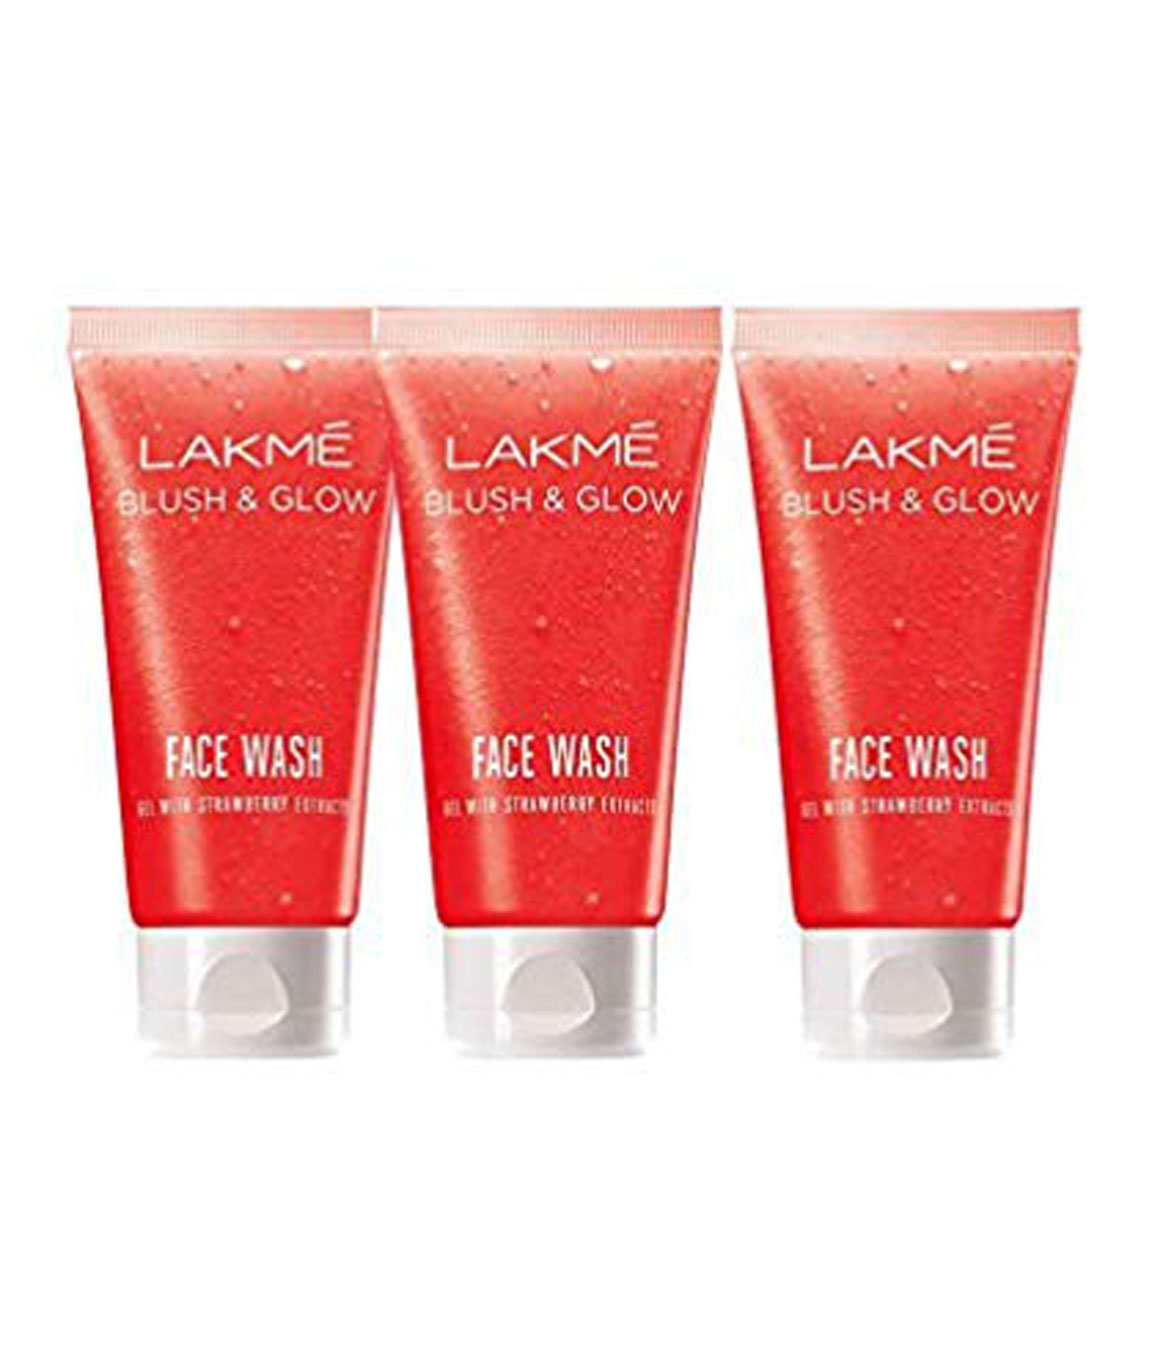 Lakme Clean Up Face Wash Nourishing Glow with Strawberry Extracts, 25gm (Pack of 3)